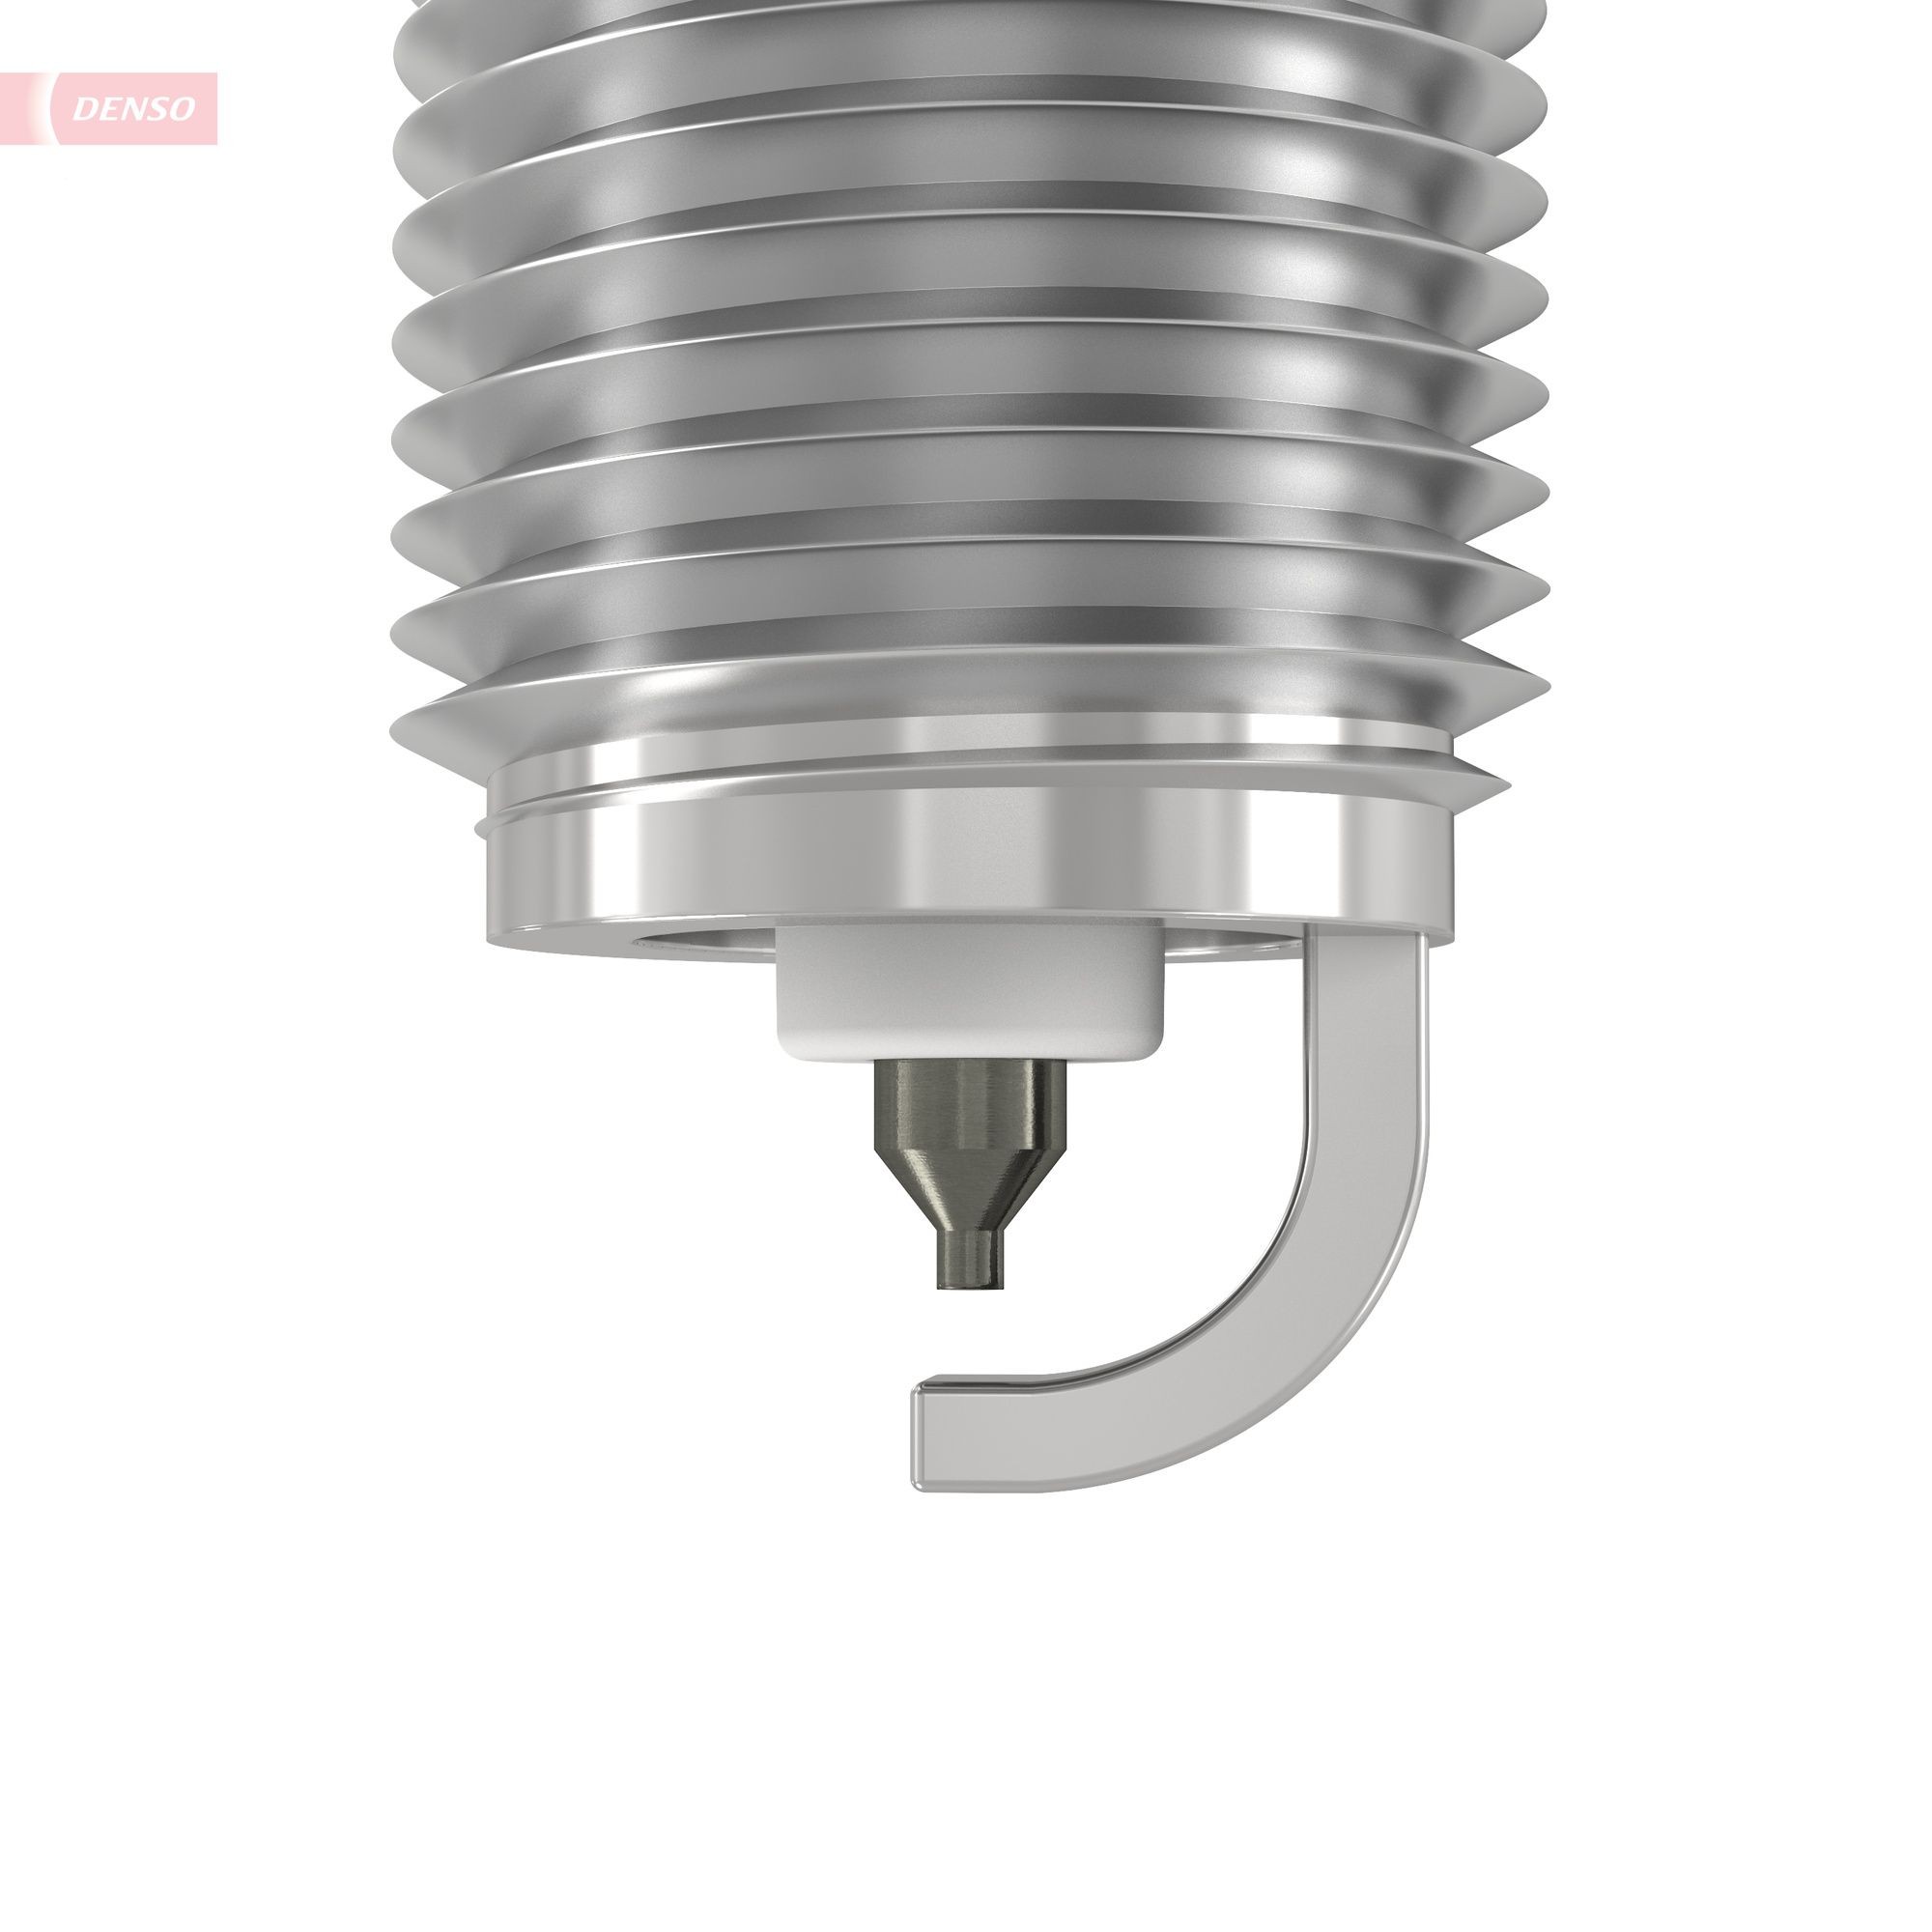 Spark plug SXU22HDR8 from DENSO